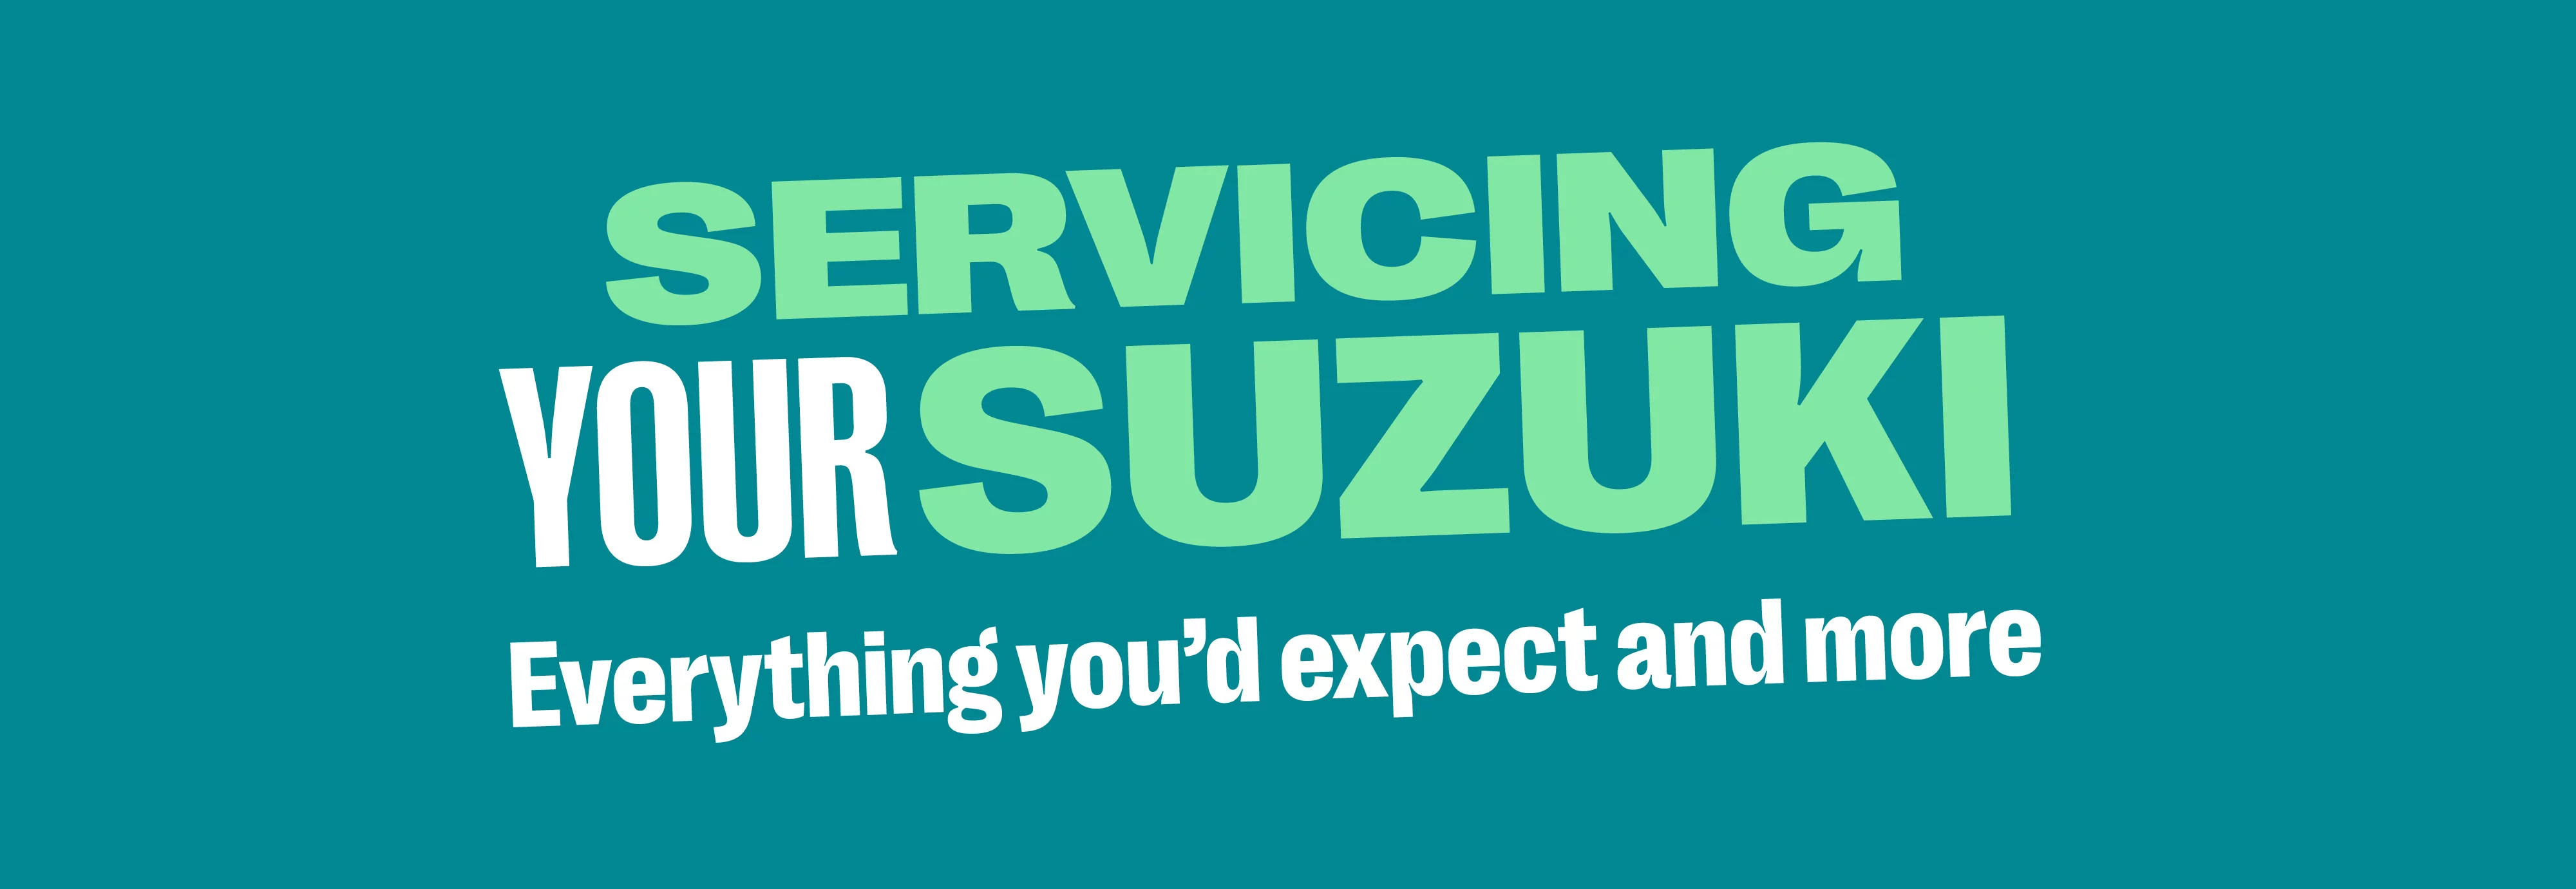 Servicing your Suzuki - everything you'd expect and more